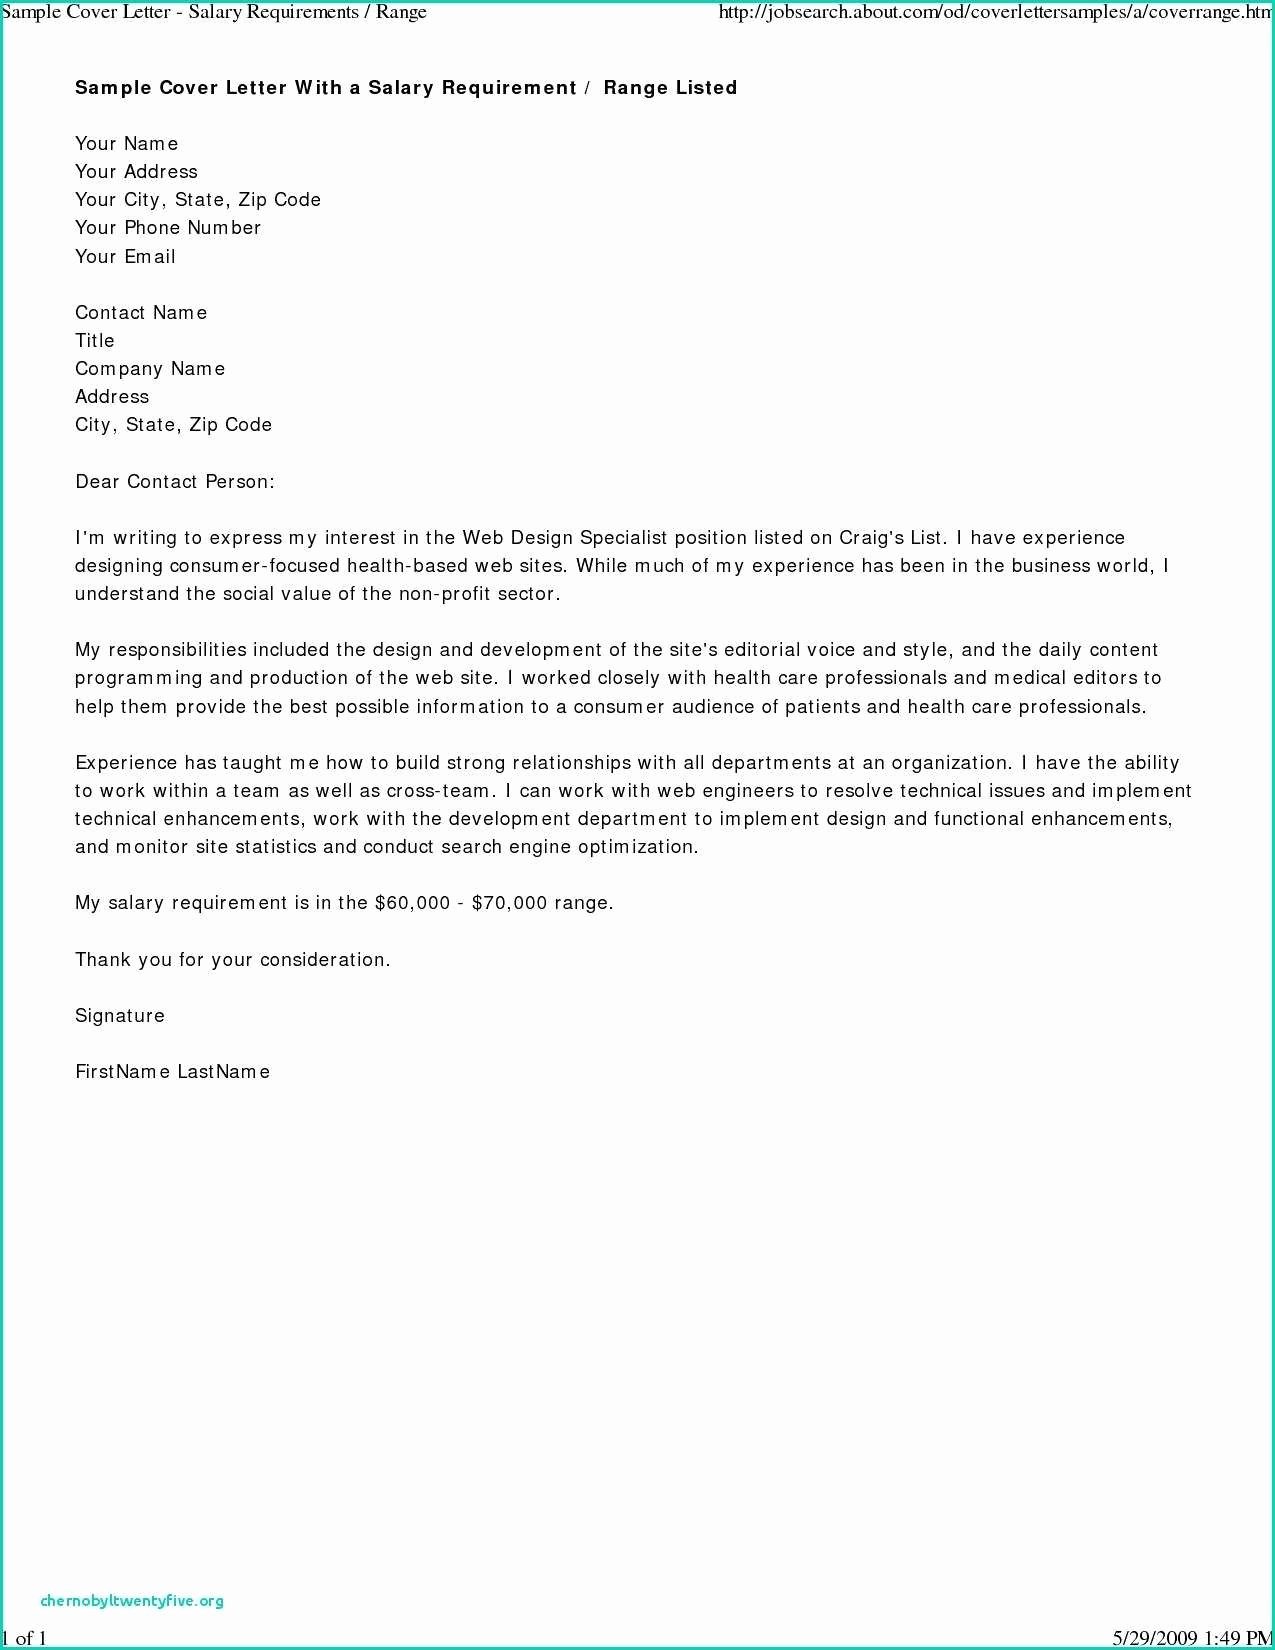 Mission Trip Donation Letter Template Lovely Template for Sponsorship Confirmation Letter New Donation